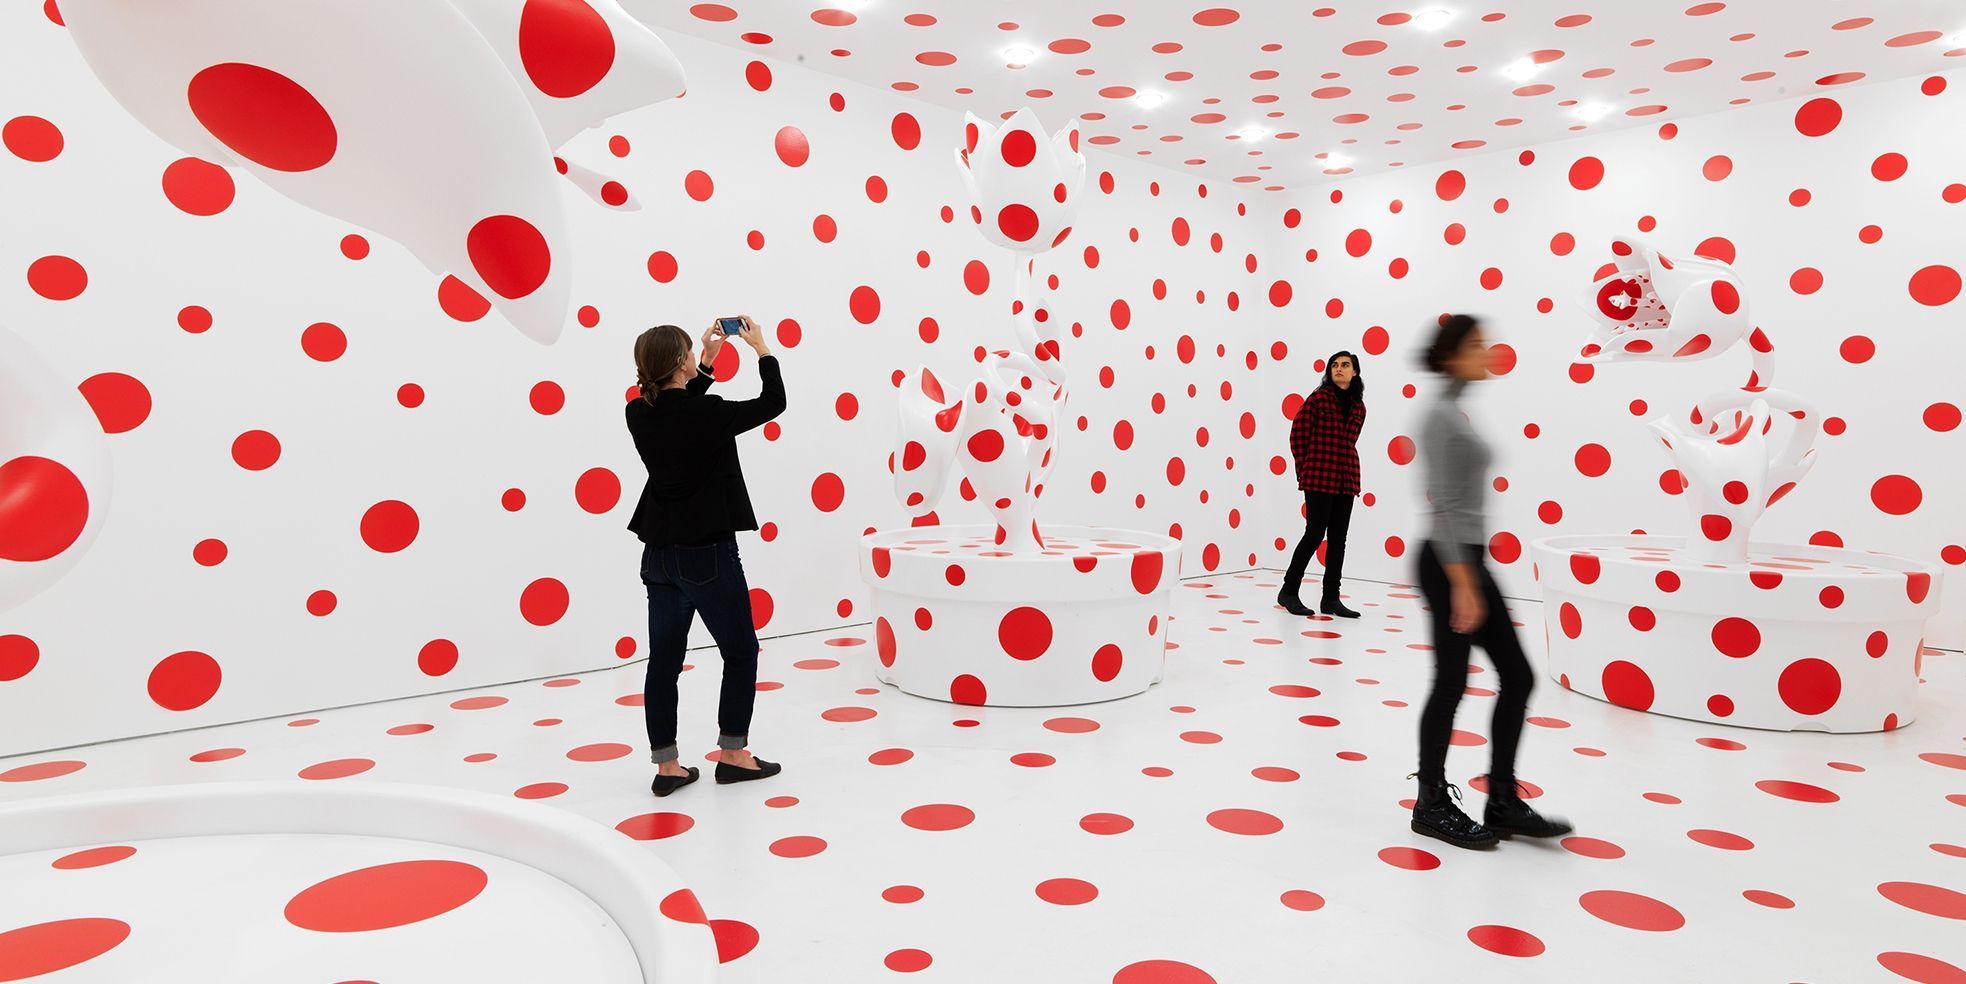 NYC's New Yayoi Kusama Infinity Room Is About To Take Over Your Insta Feed